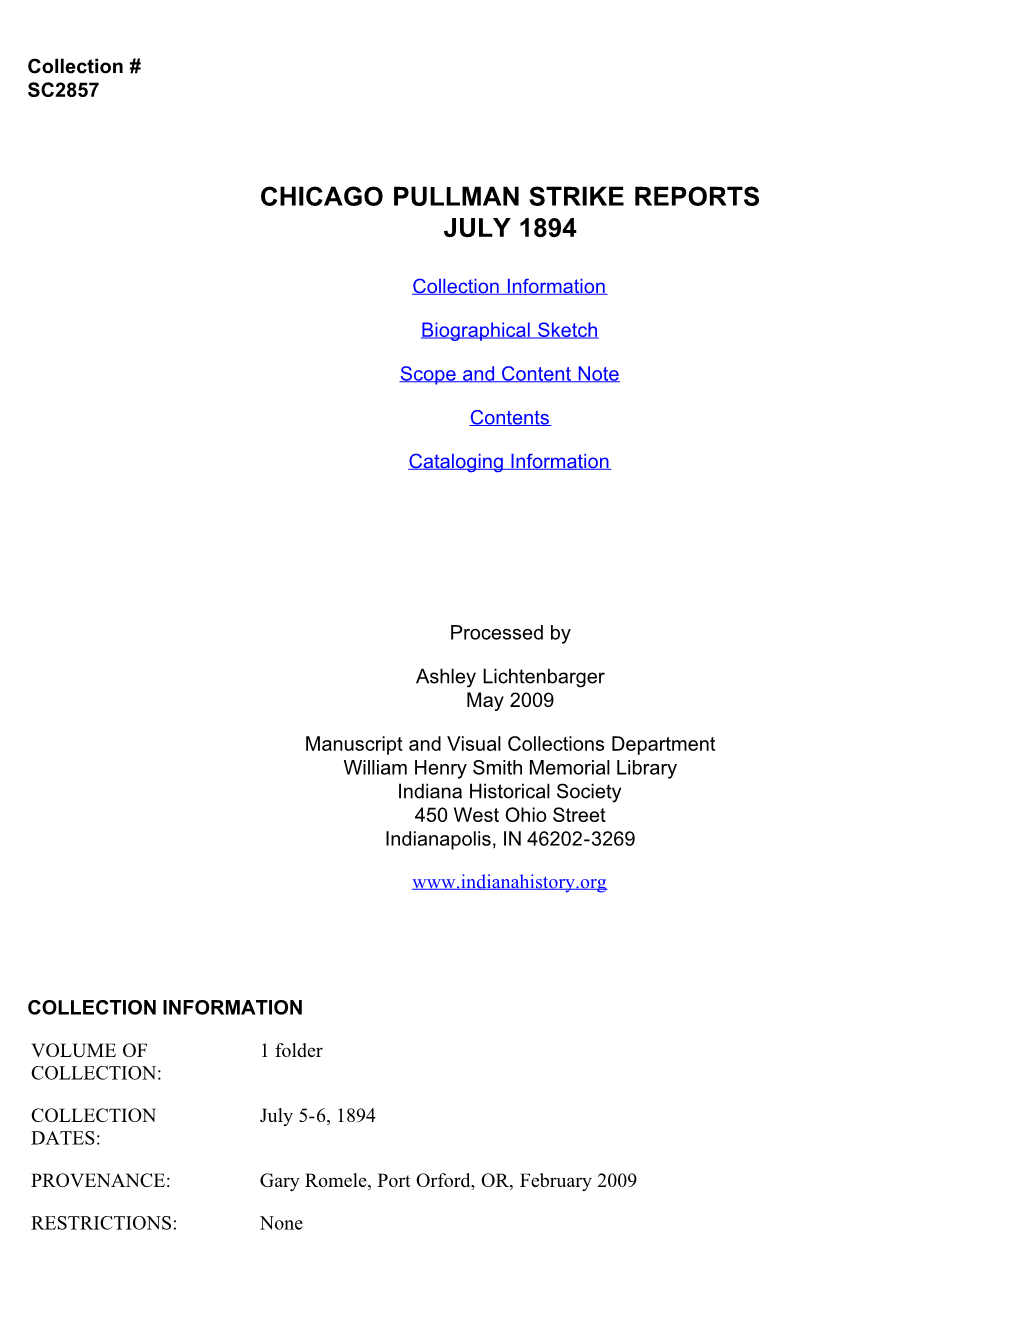 Chicago Pullman Strike Reports July 1894